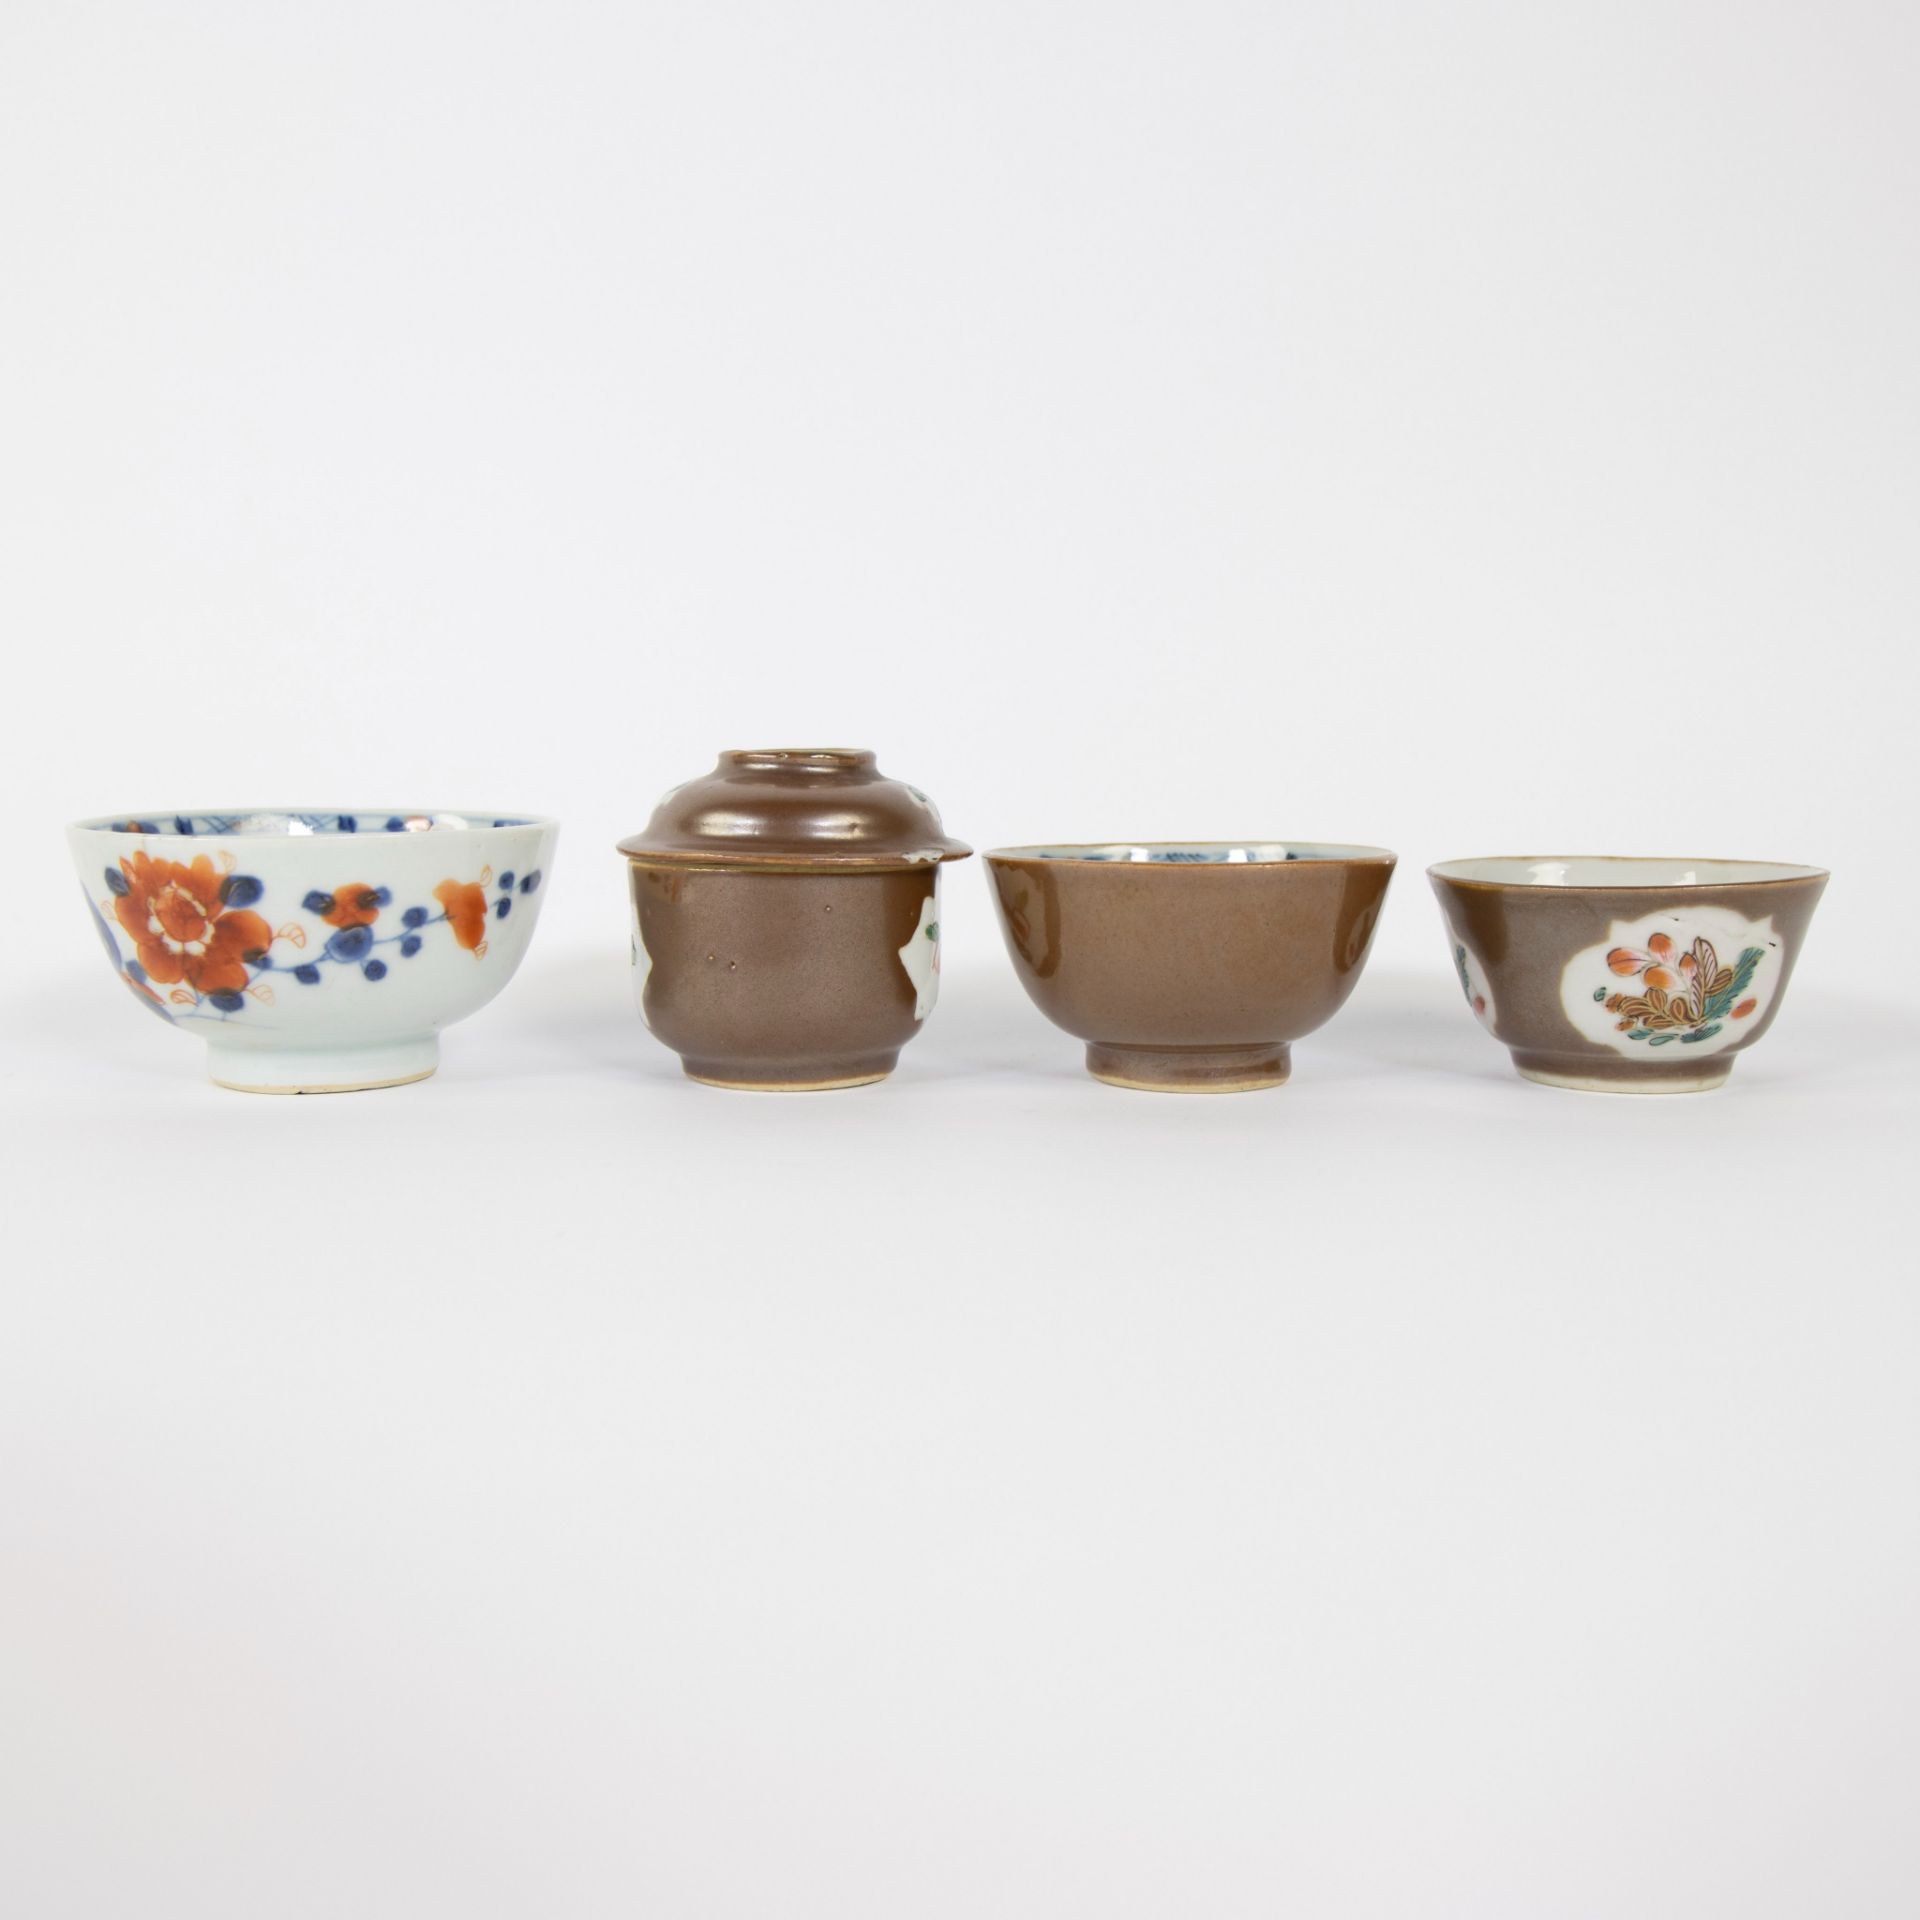 A set of Chinese batavia brown cups and saucers, one Imari cup and 2 plates blue/white, 18th C. - Image 5 of 11